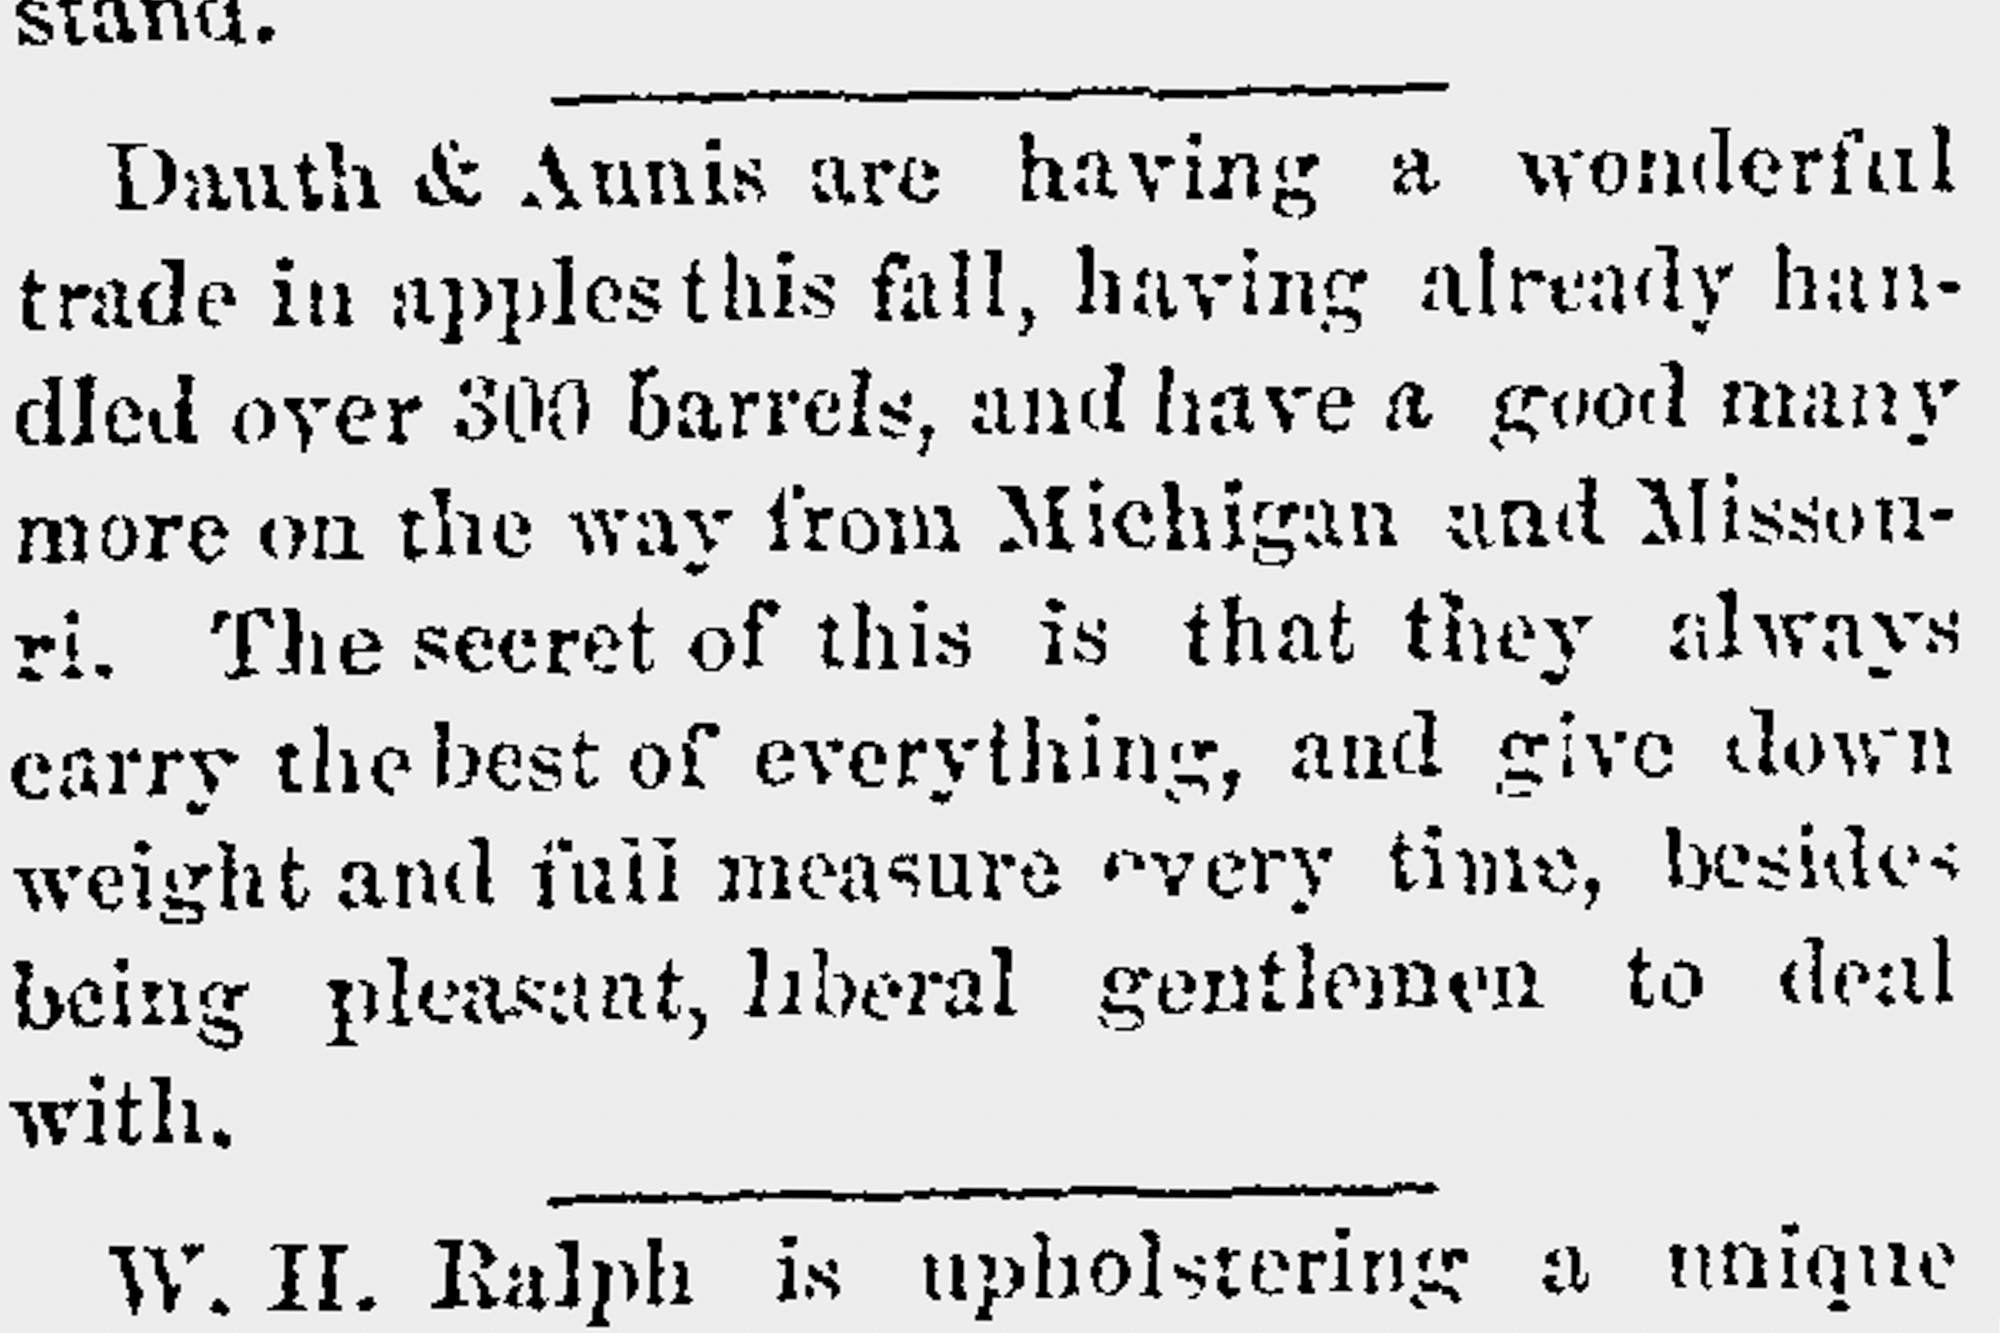 Dauth Family Archive - 1884-12-11 - Fort Collins Courier - Louis Dauth Apple Sales